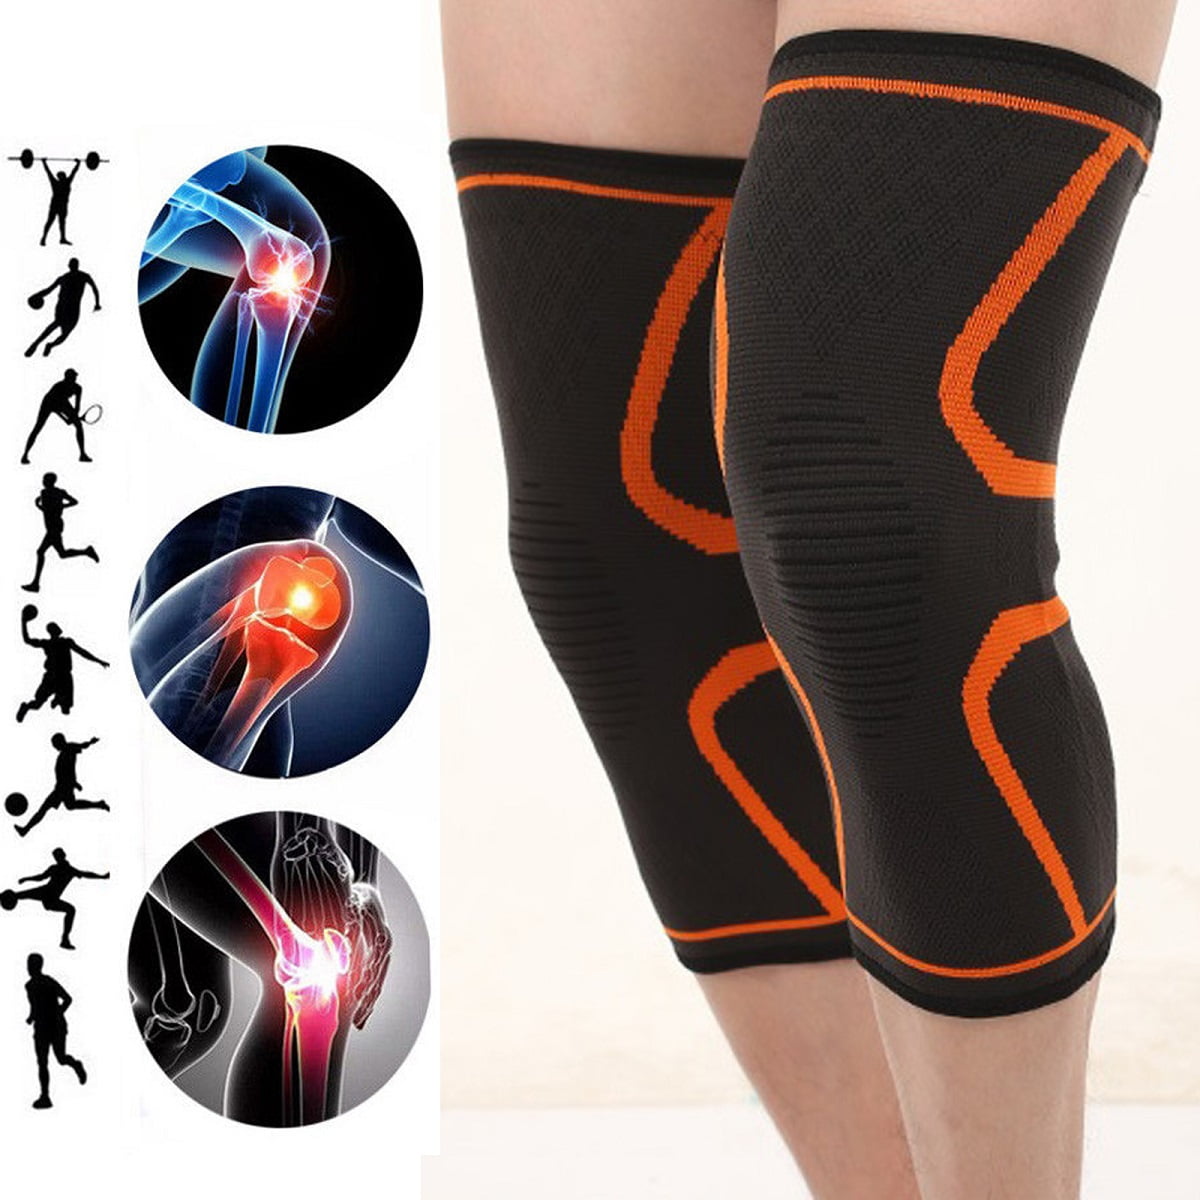 Protects Patella For Men and Women Compression Sports Knee Support Sleeve Crossfit & Anywhere Use for Running Good Recovery & Pain Relief 